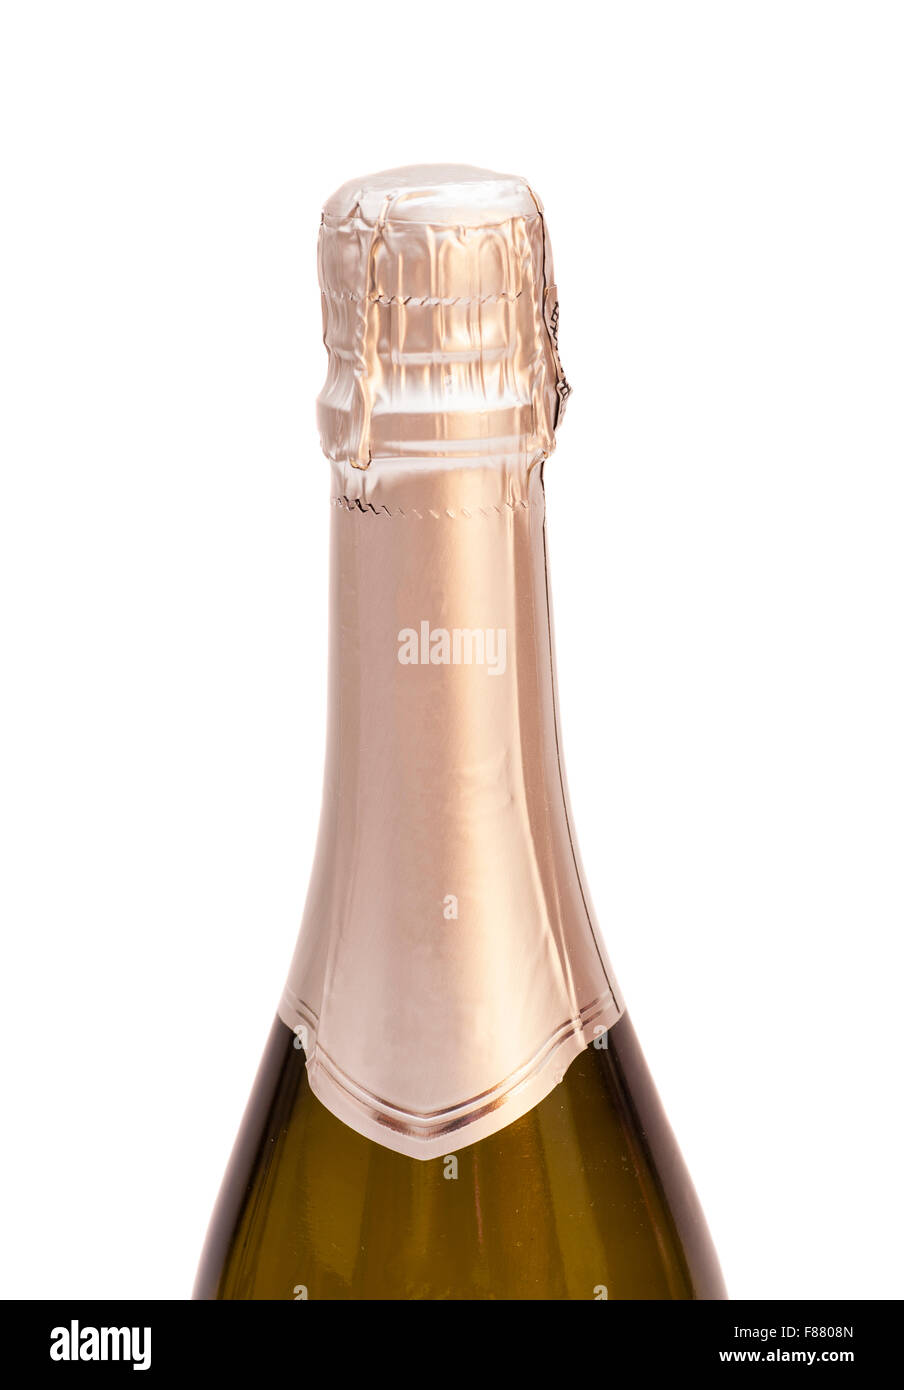 Champagne bottle, isolated on a white background. Stock Photo